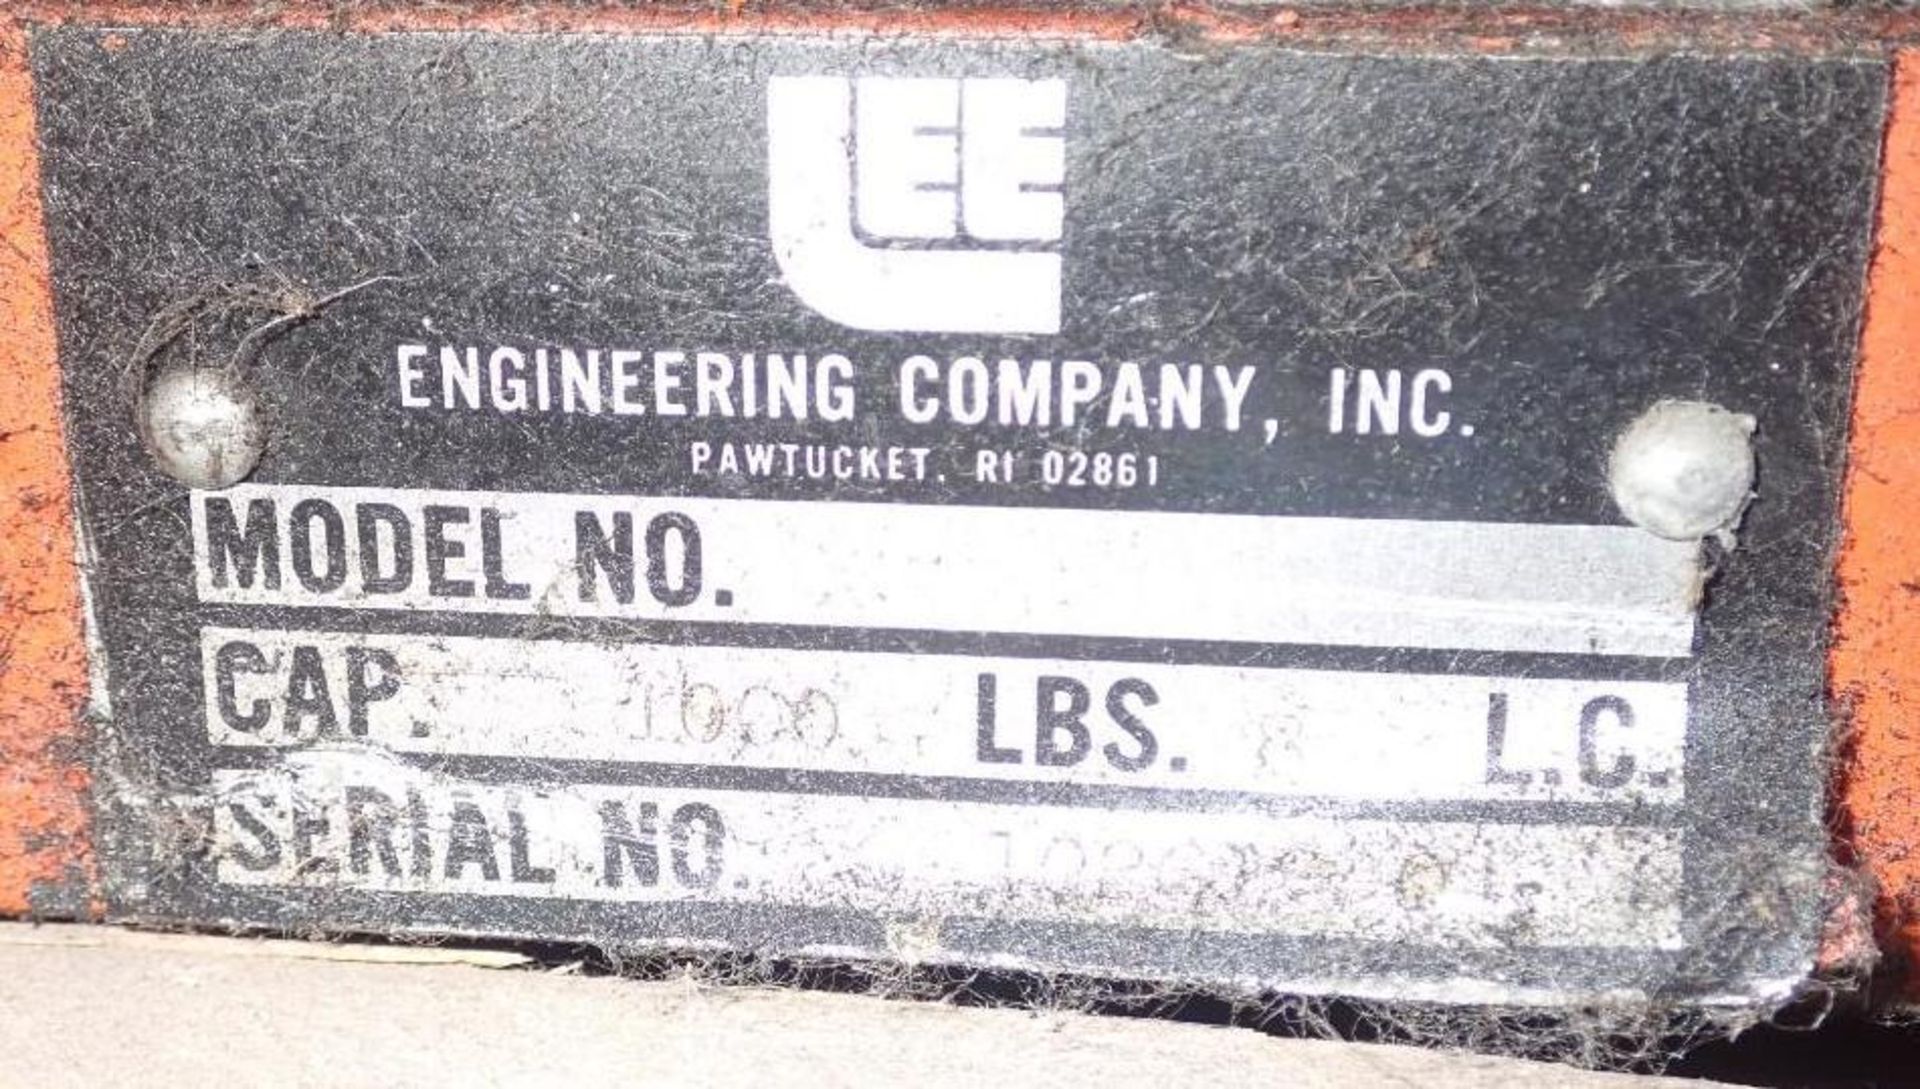 Lee Engineering 1000 Lb. Lift Table - Image 4 of 5